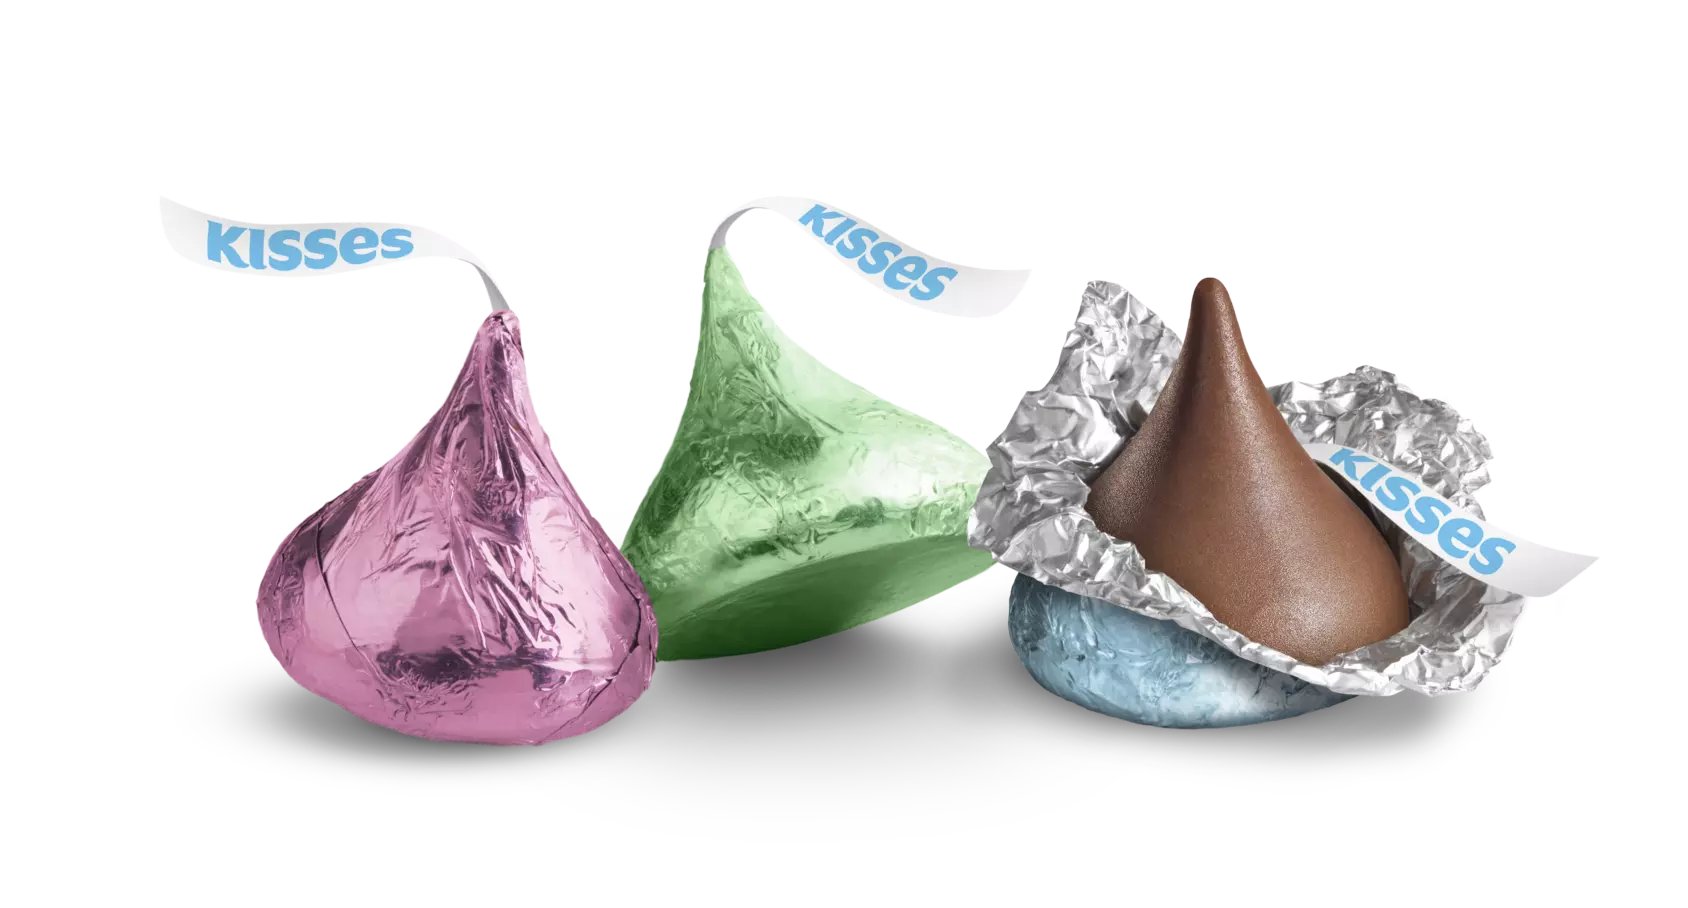 HERSHEY'S KISSES Easter Milk Chocolate Candy, 10.1 oz bag - Out of Package